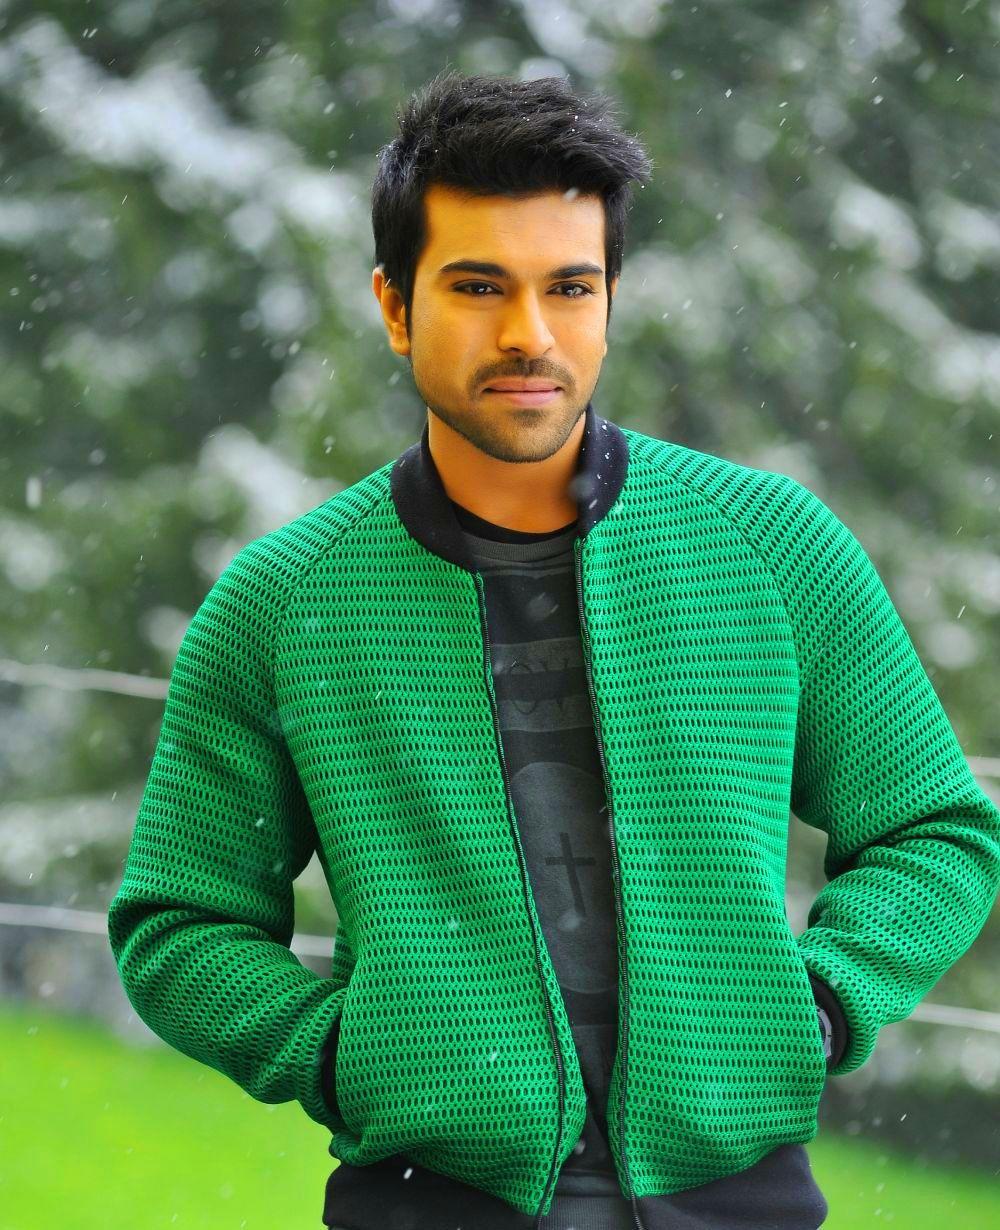 Ram charan image photo picture Wallpaper HD Download Here